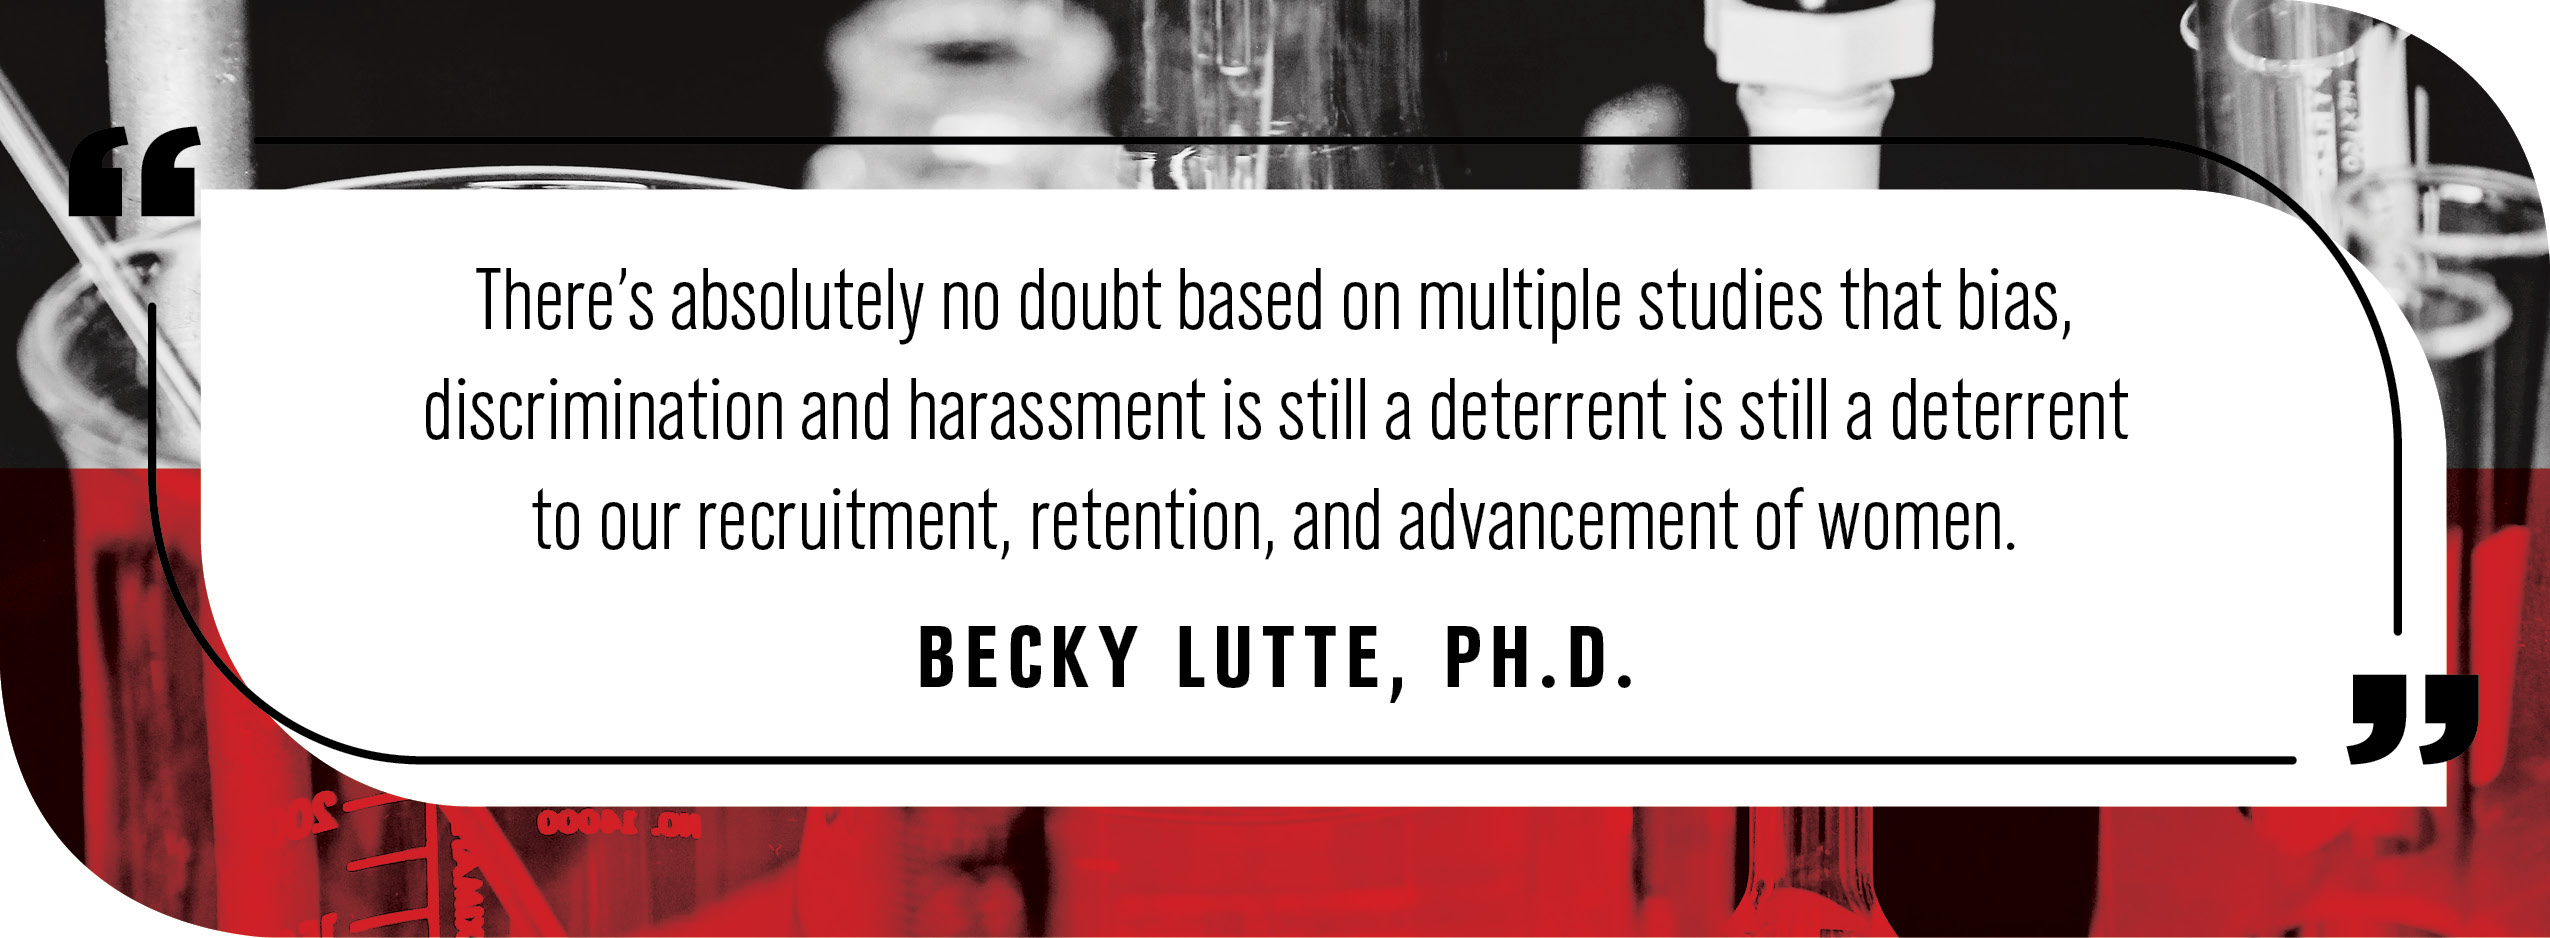 Pull quote by Beck Lutte Ph.D: "“There's absolutely no doubt based on multiple studies that bias, discrimination and harassment is still a deterrent is still a deterrent to our recruitment, retention, and advancement of women."